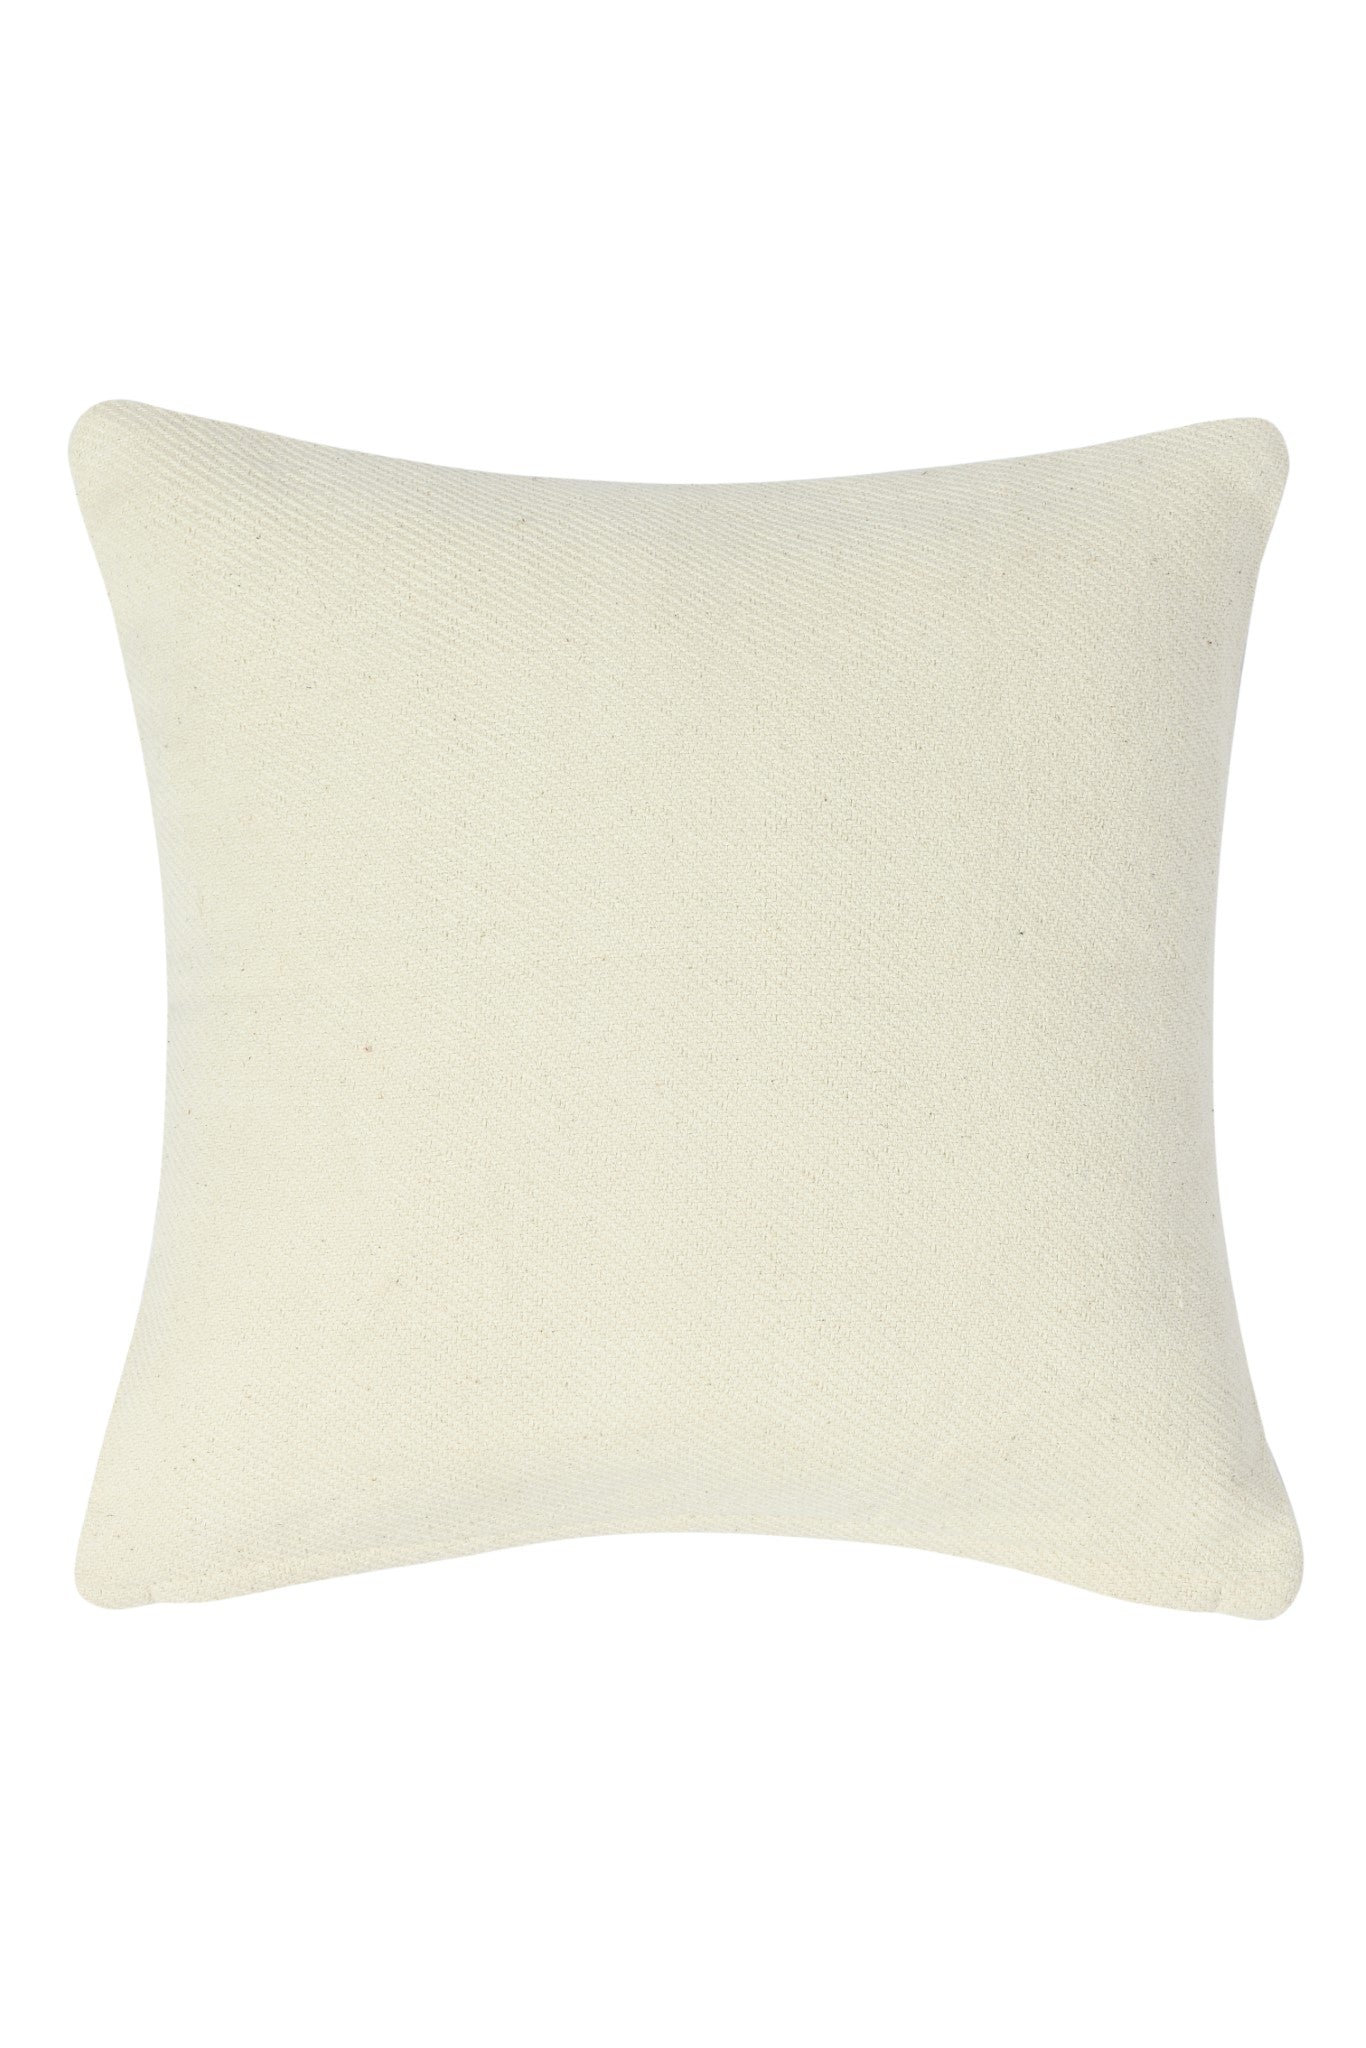 Suti Natural Extra Weft Woven Cushion Cover (Small)